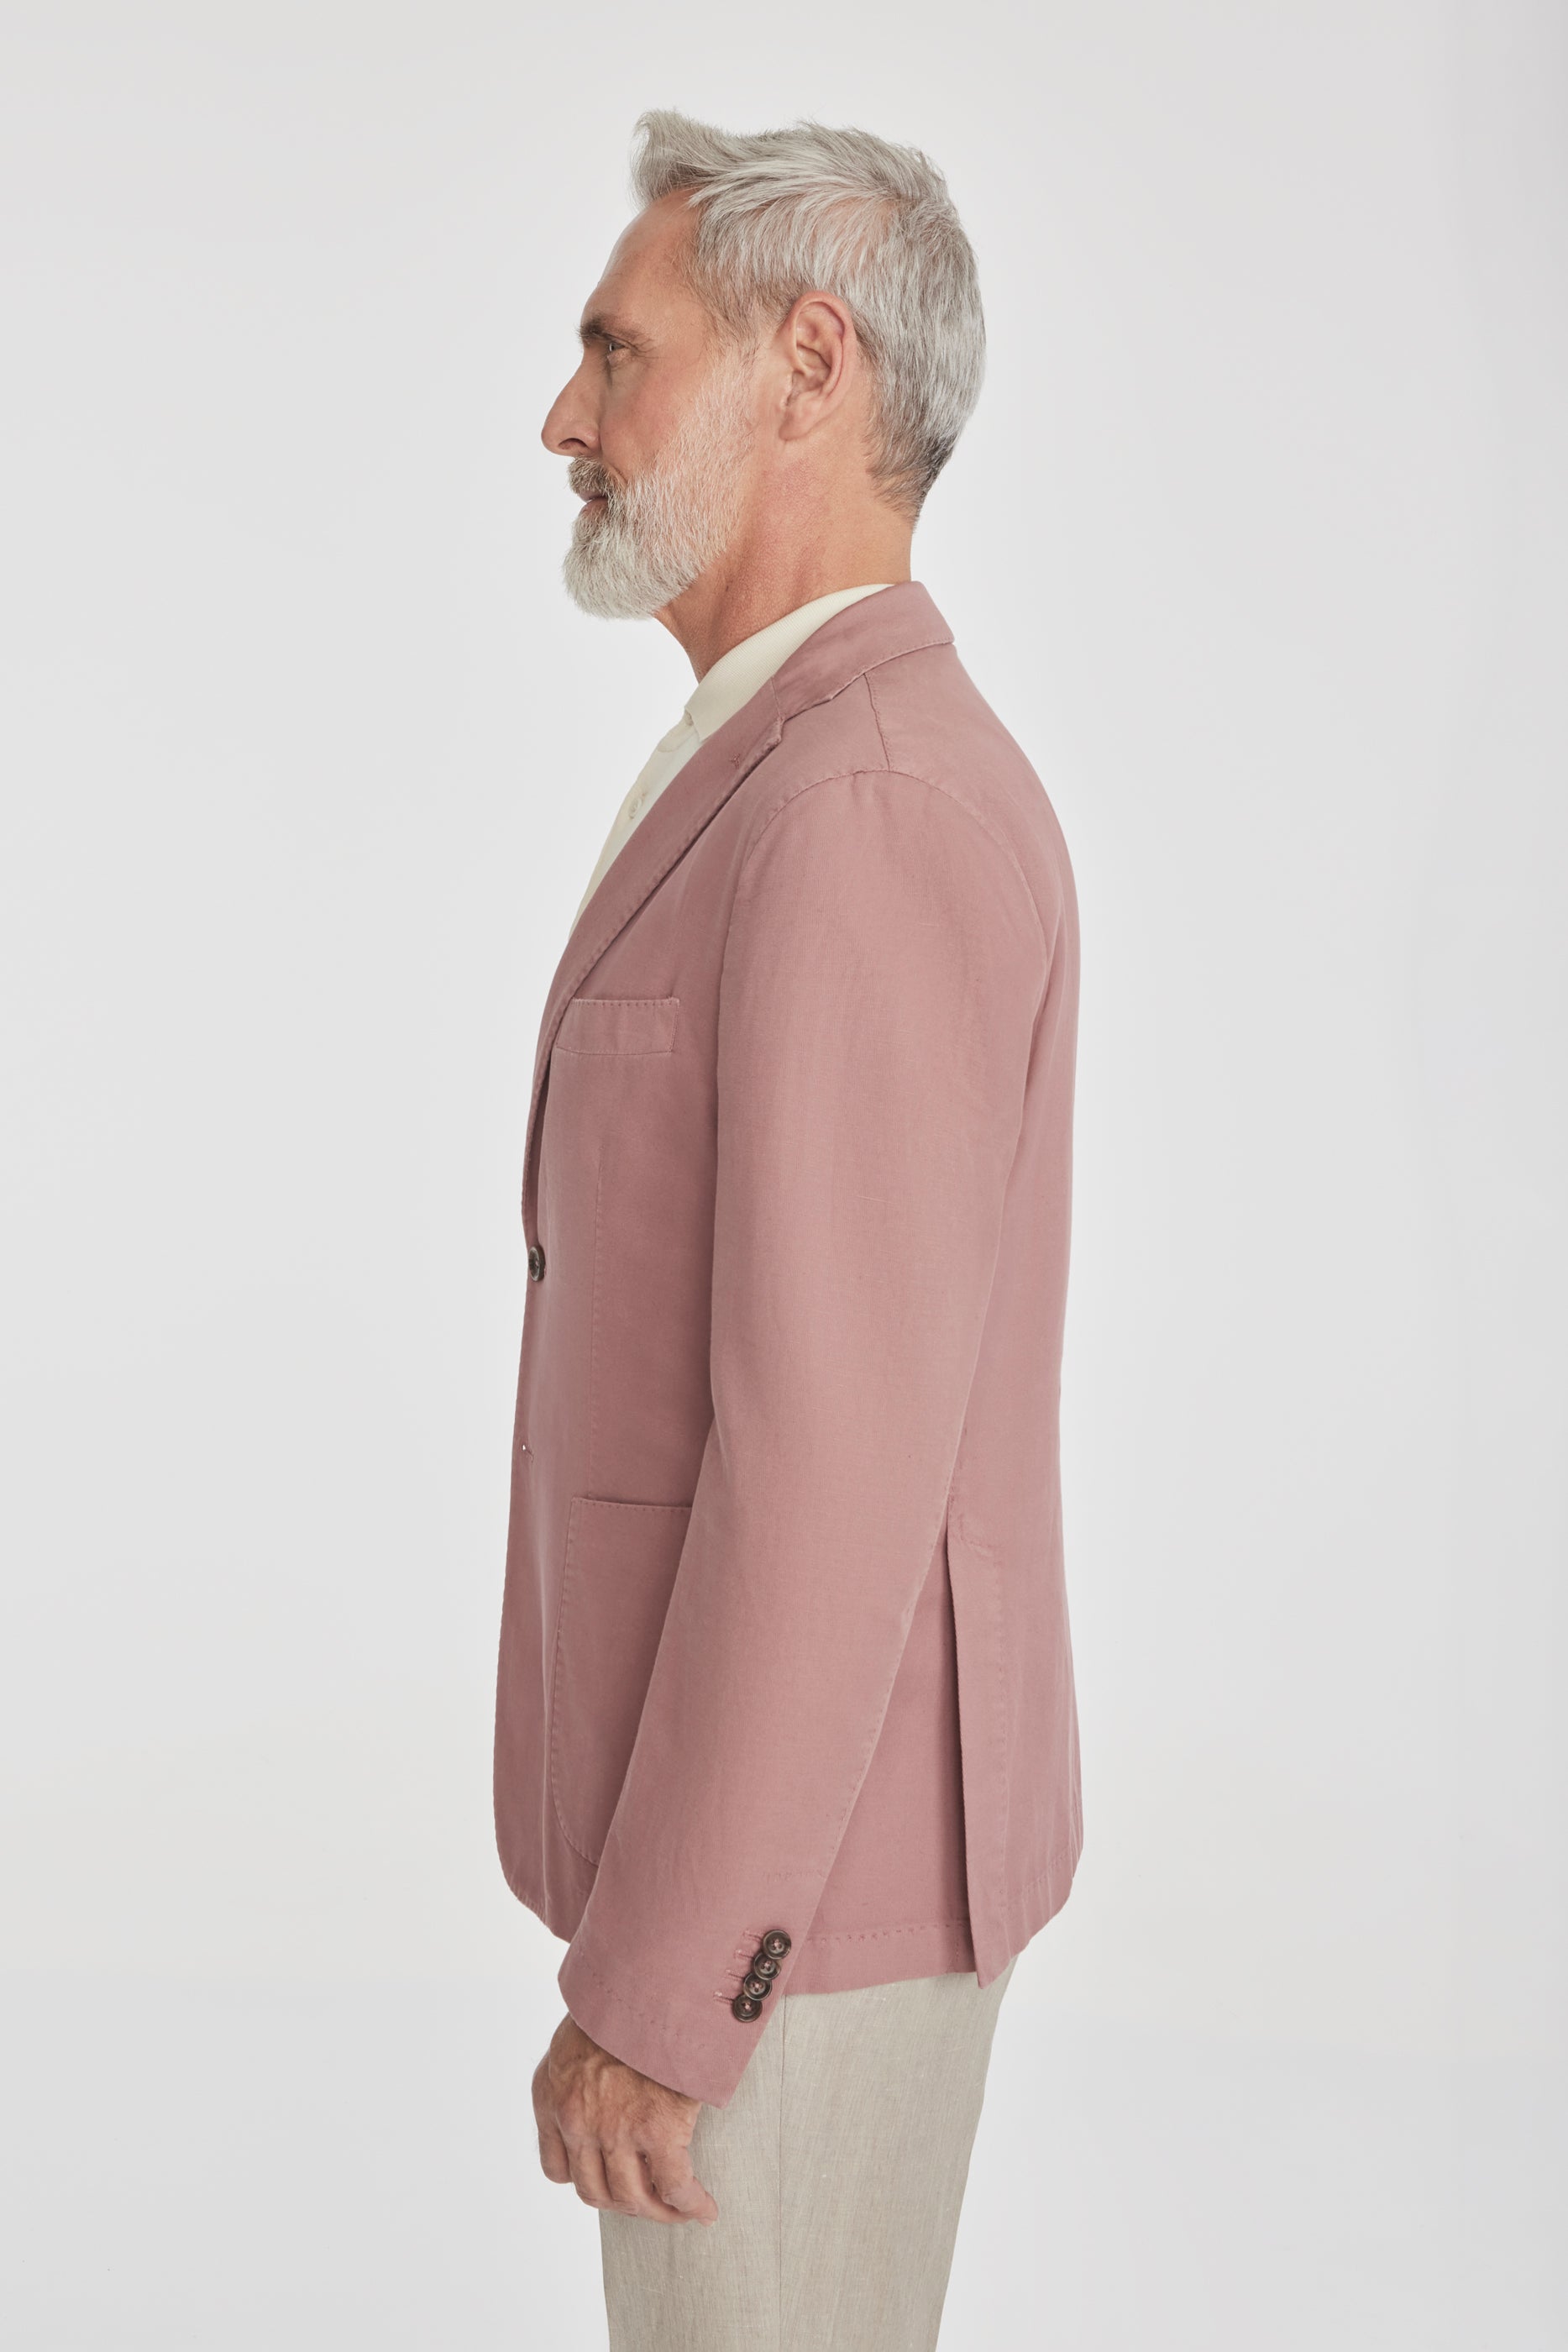 Alt view 3 Eaton Cotton and Linen Blazer in Coral Rose